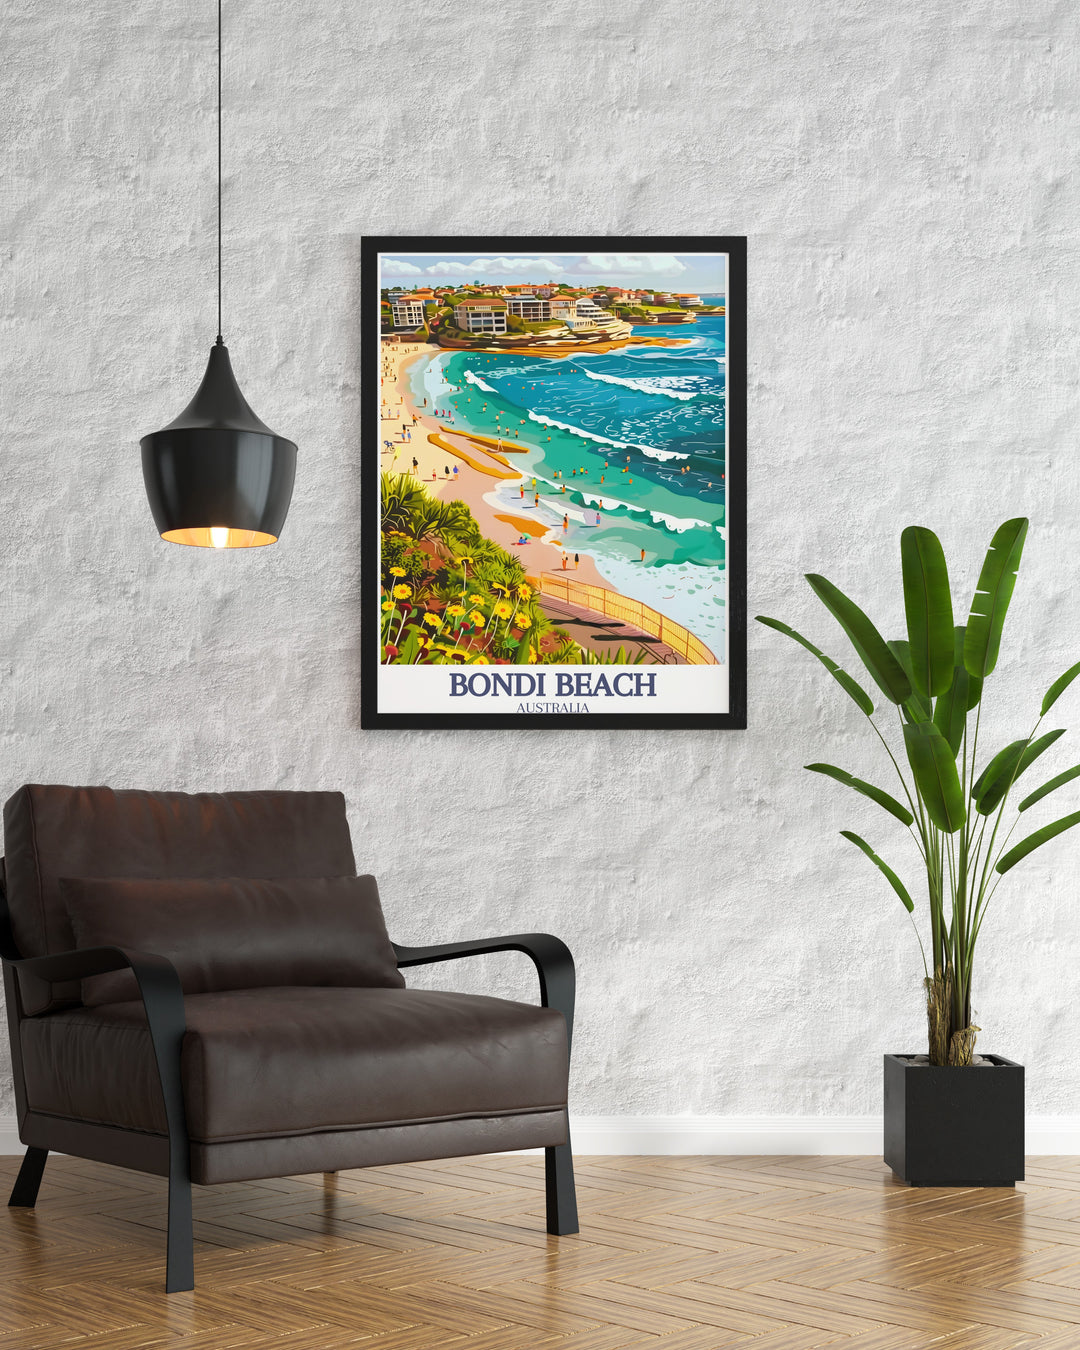 Detailed Sydney illustration featuring the iconic landmarks of the Sydney Opera House and Harbour Bridge. Bondi to Coogee Coastal Walk Bondi stunning prints offer a vibrant depiction of the coastal walk, perfect for adding a touch of elegance to your decor.